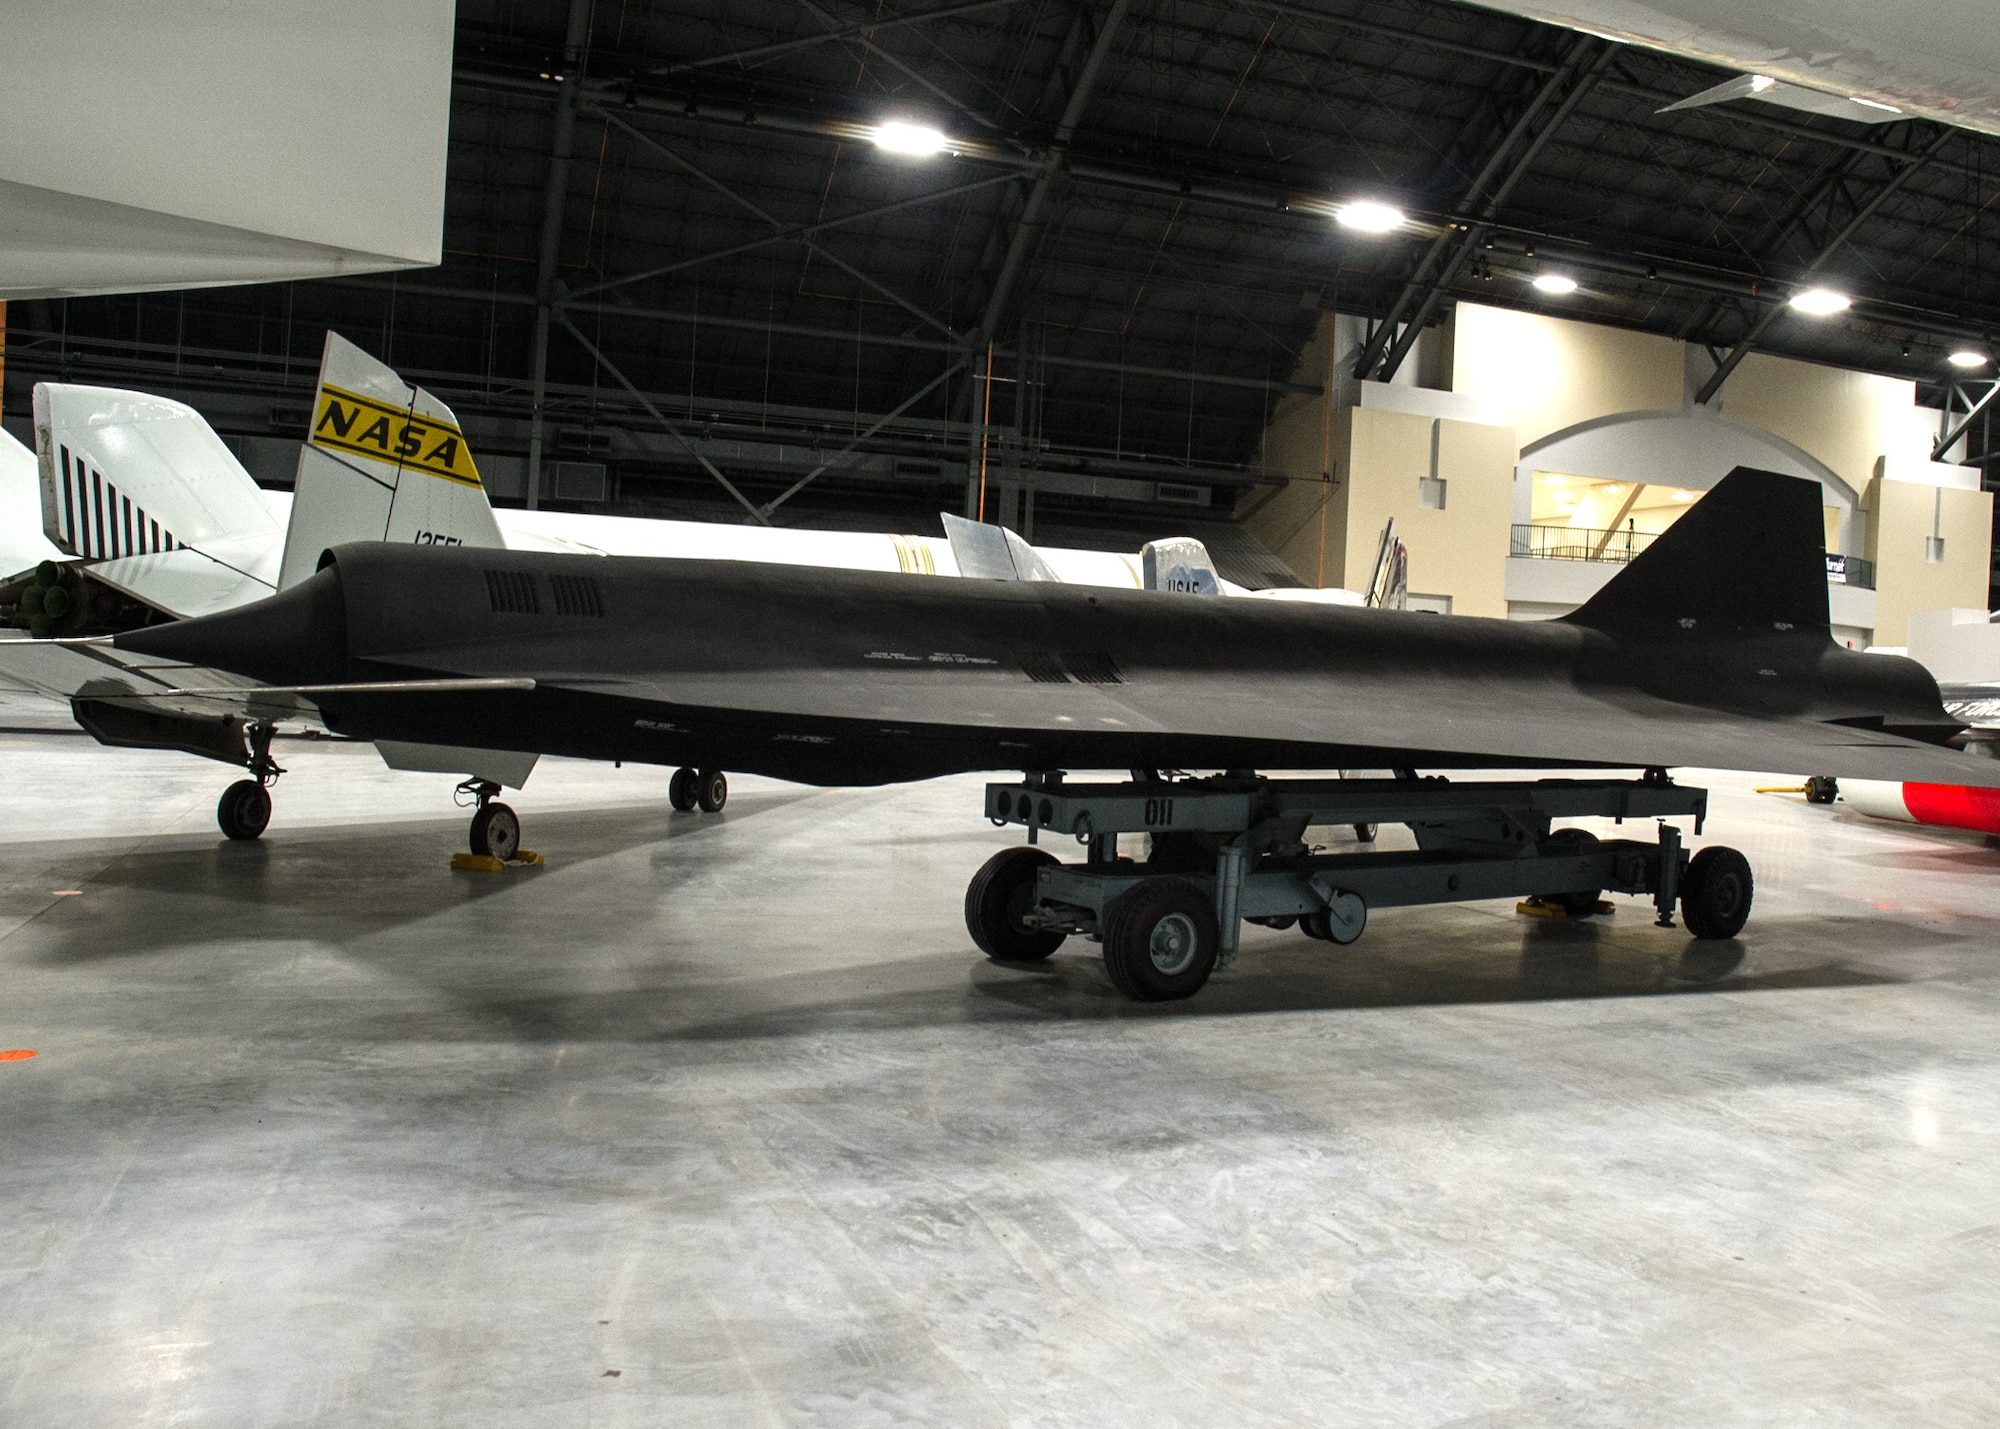 Lockheed D-21B in the Research & Development Gallery at the National Museum of the U.S. Air Force on December 28, 2015. (U.S. Air Force photo)